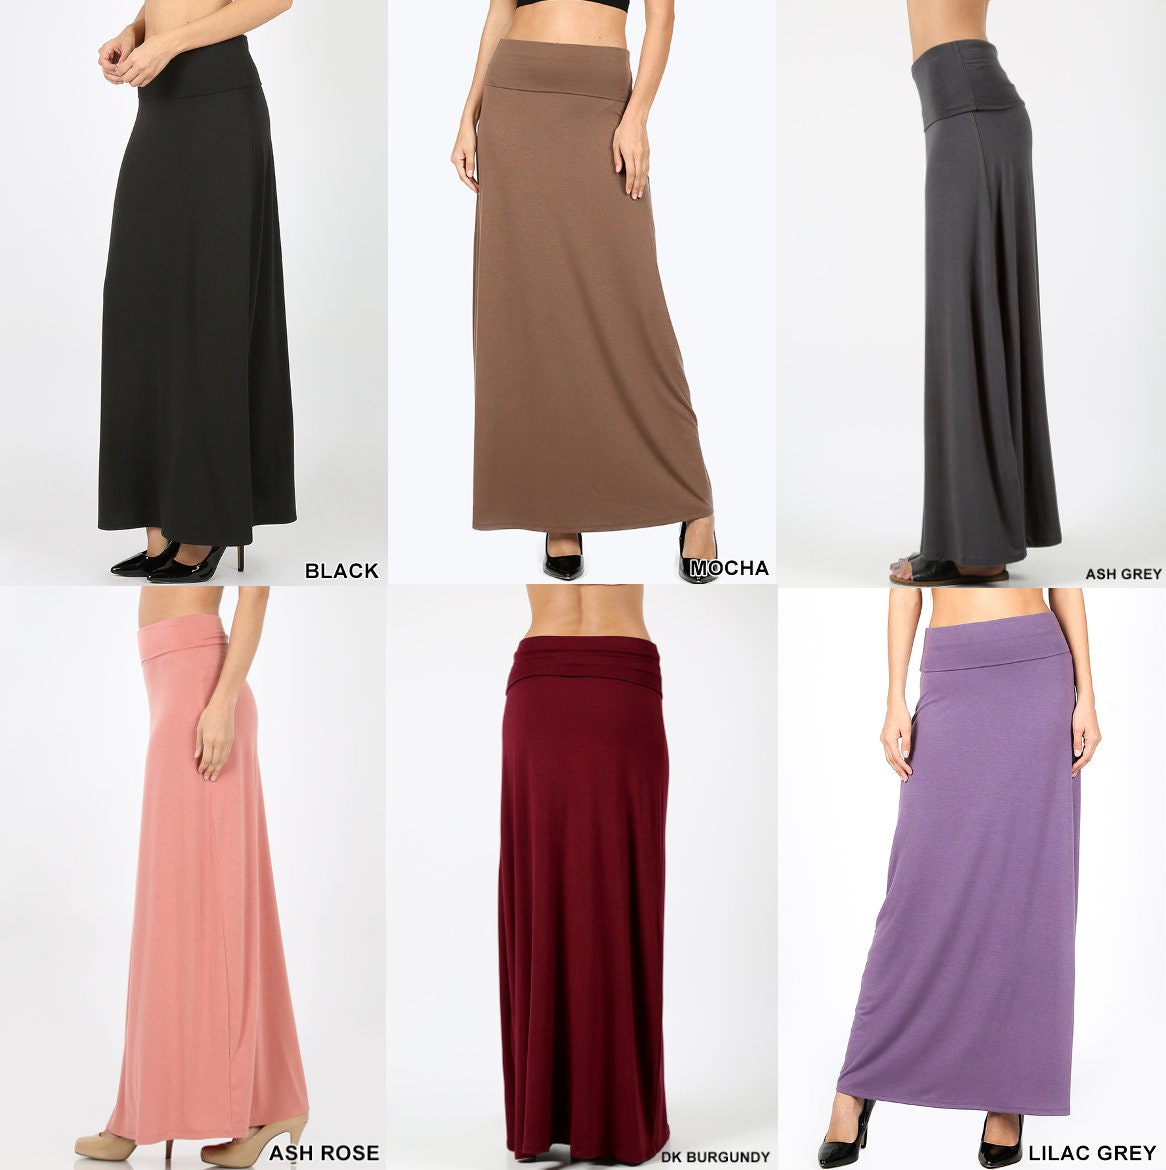  SuperPrity Flare Maxi Skirts for Women High Waisted